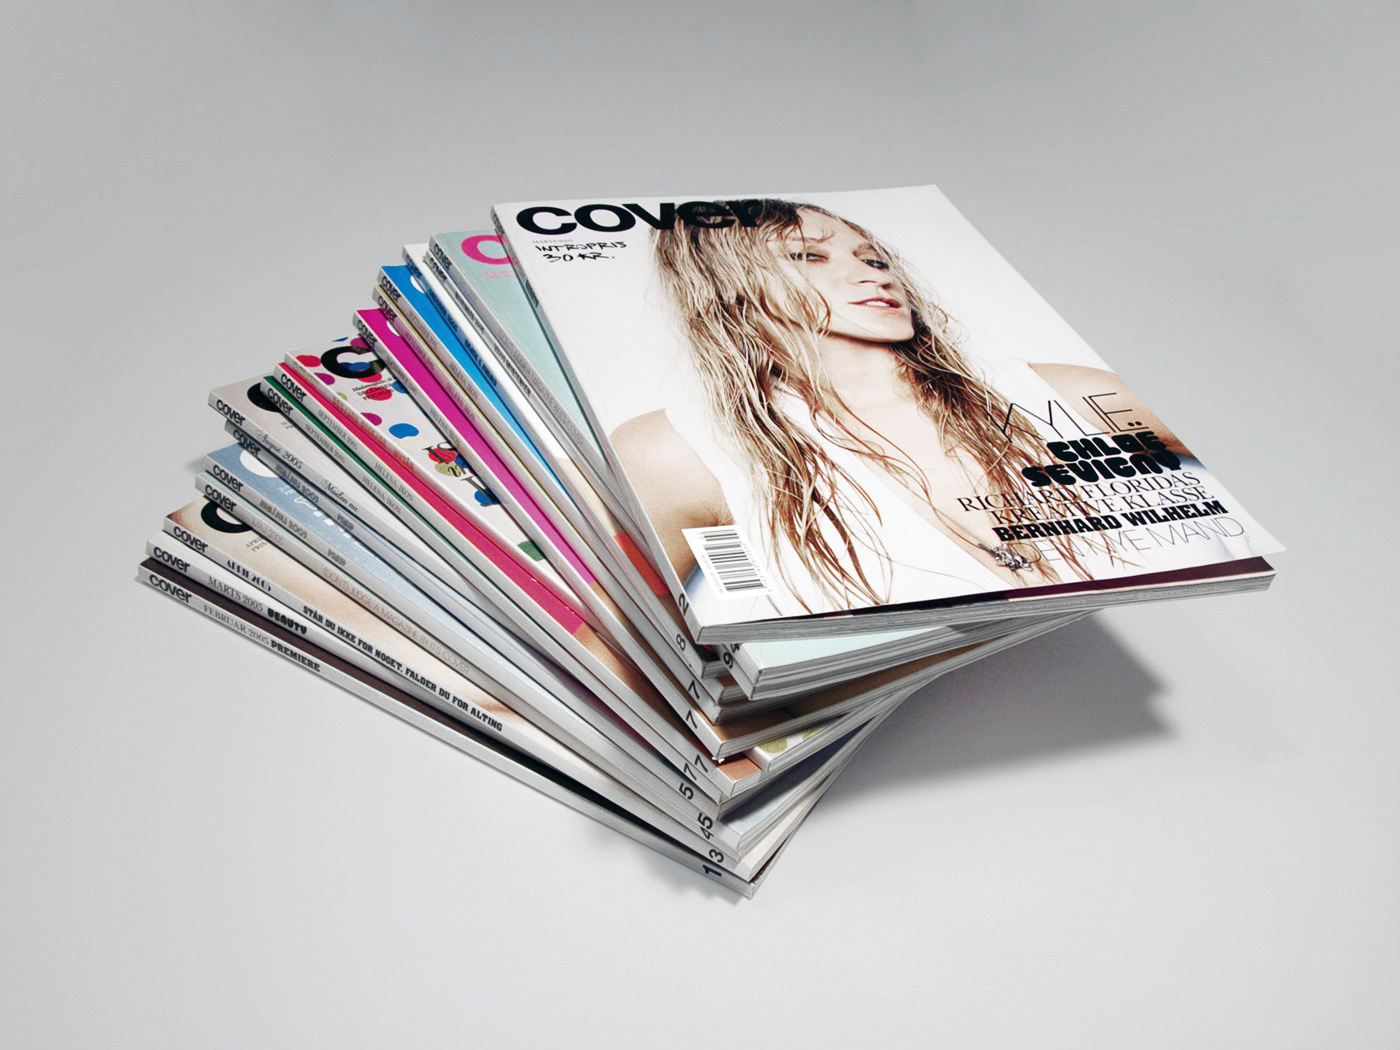 Cover magazine – covers